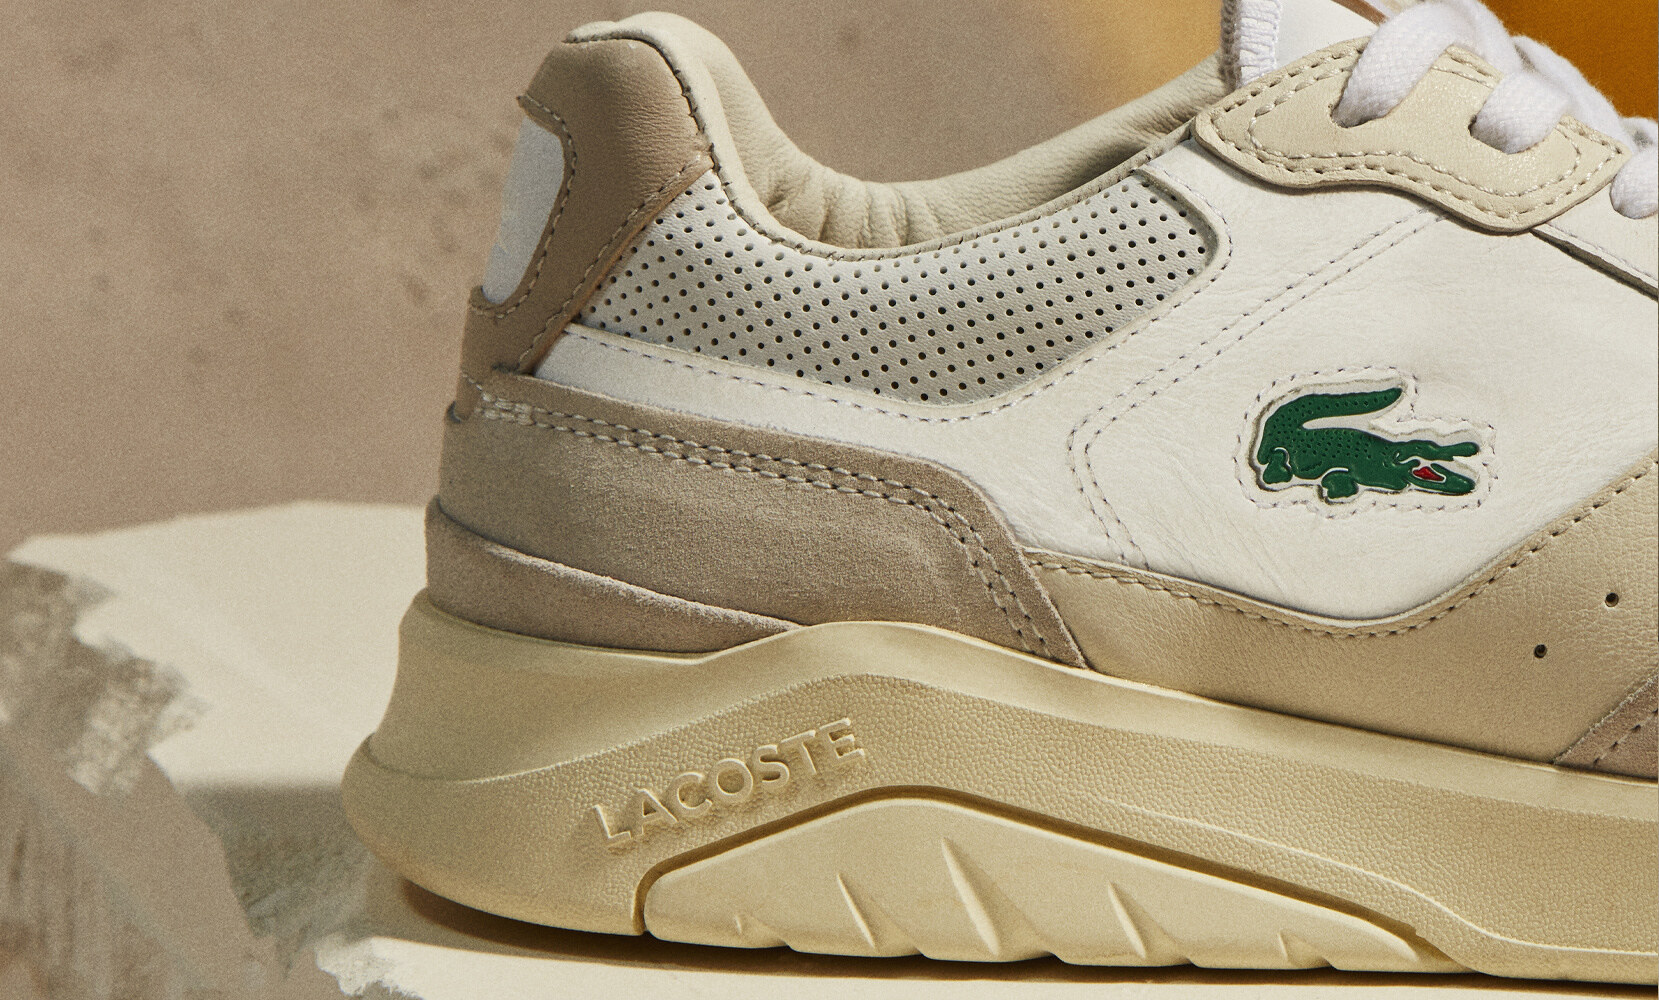 Lacoste Game Advance Luxe